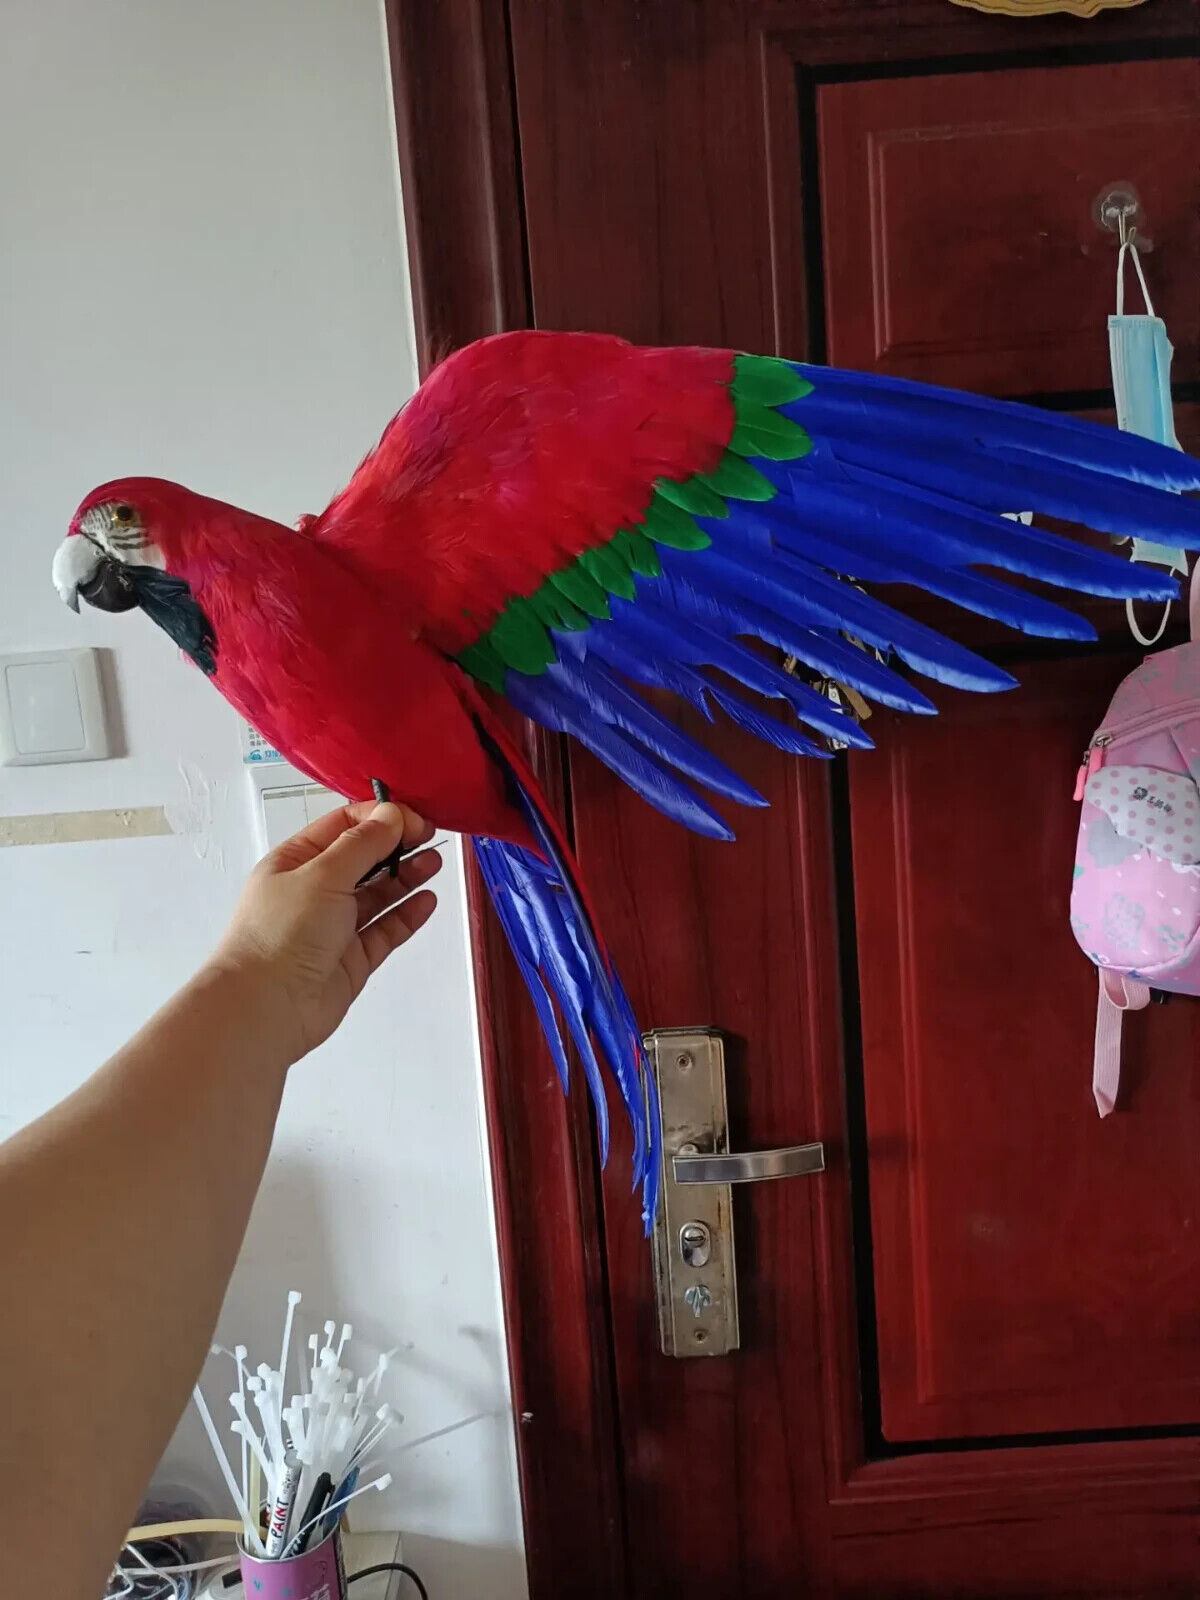 simulation parrot model foam&feather red wings parrot bird gift about 40x60cm